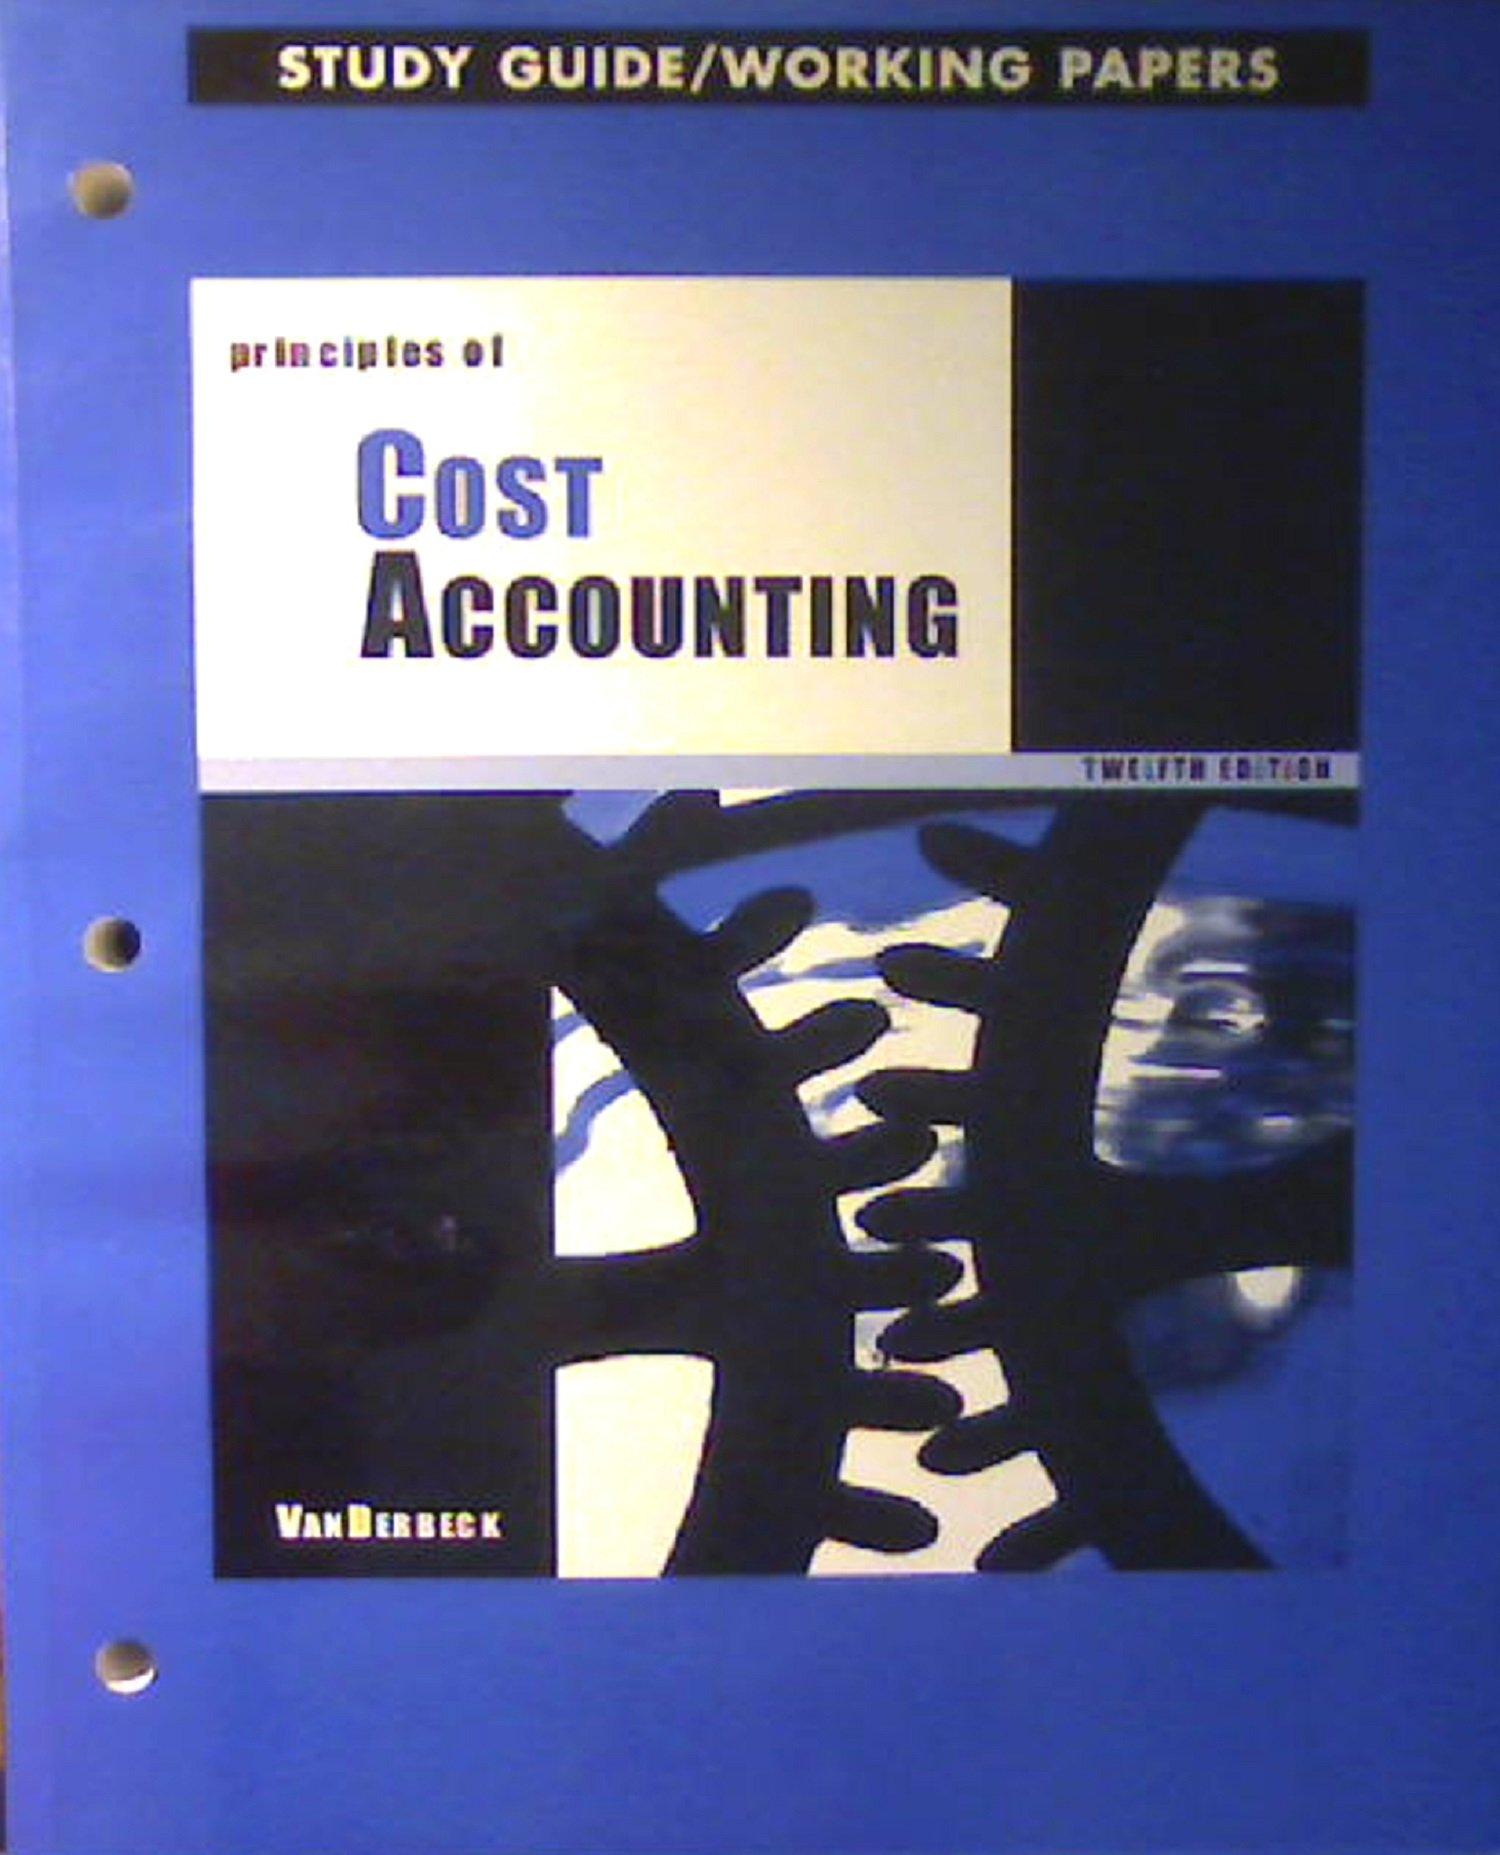 principles of cost accounting study guide and working papers 12th edition edward j. vanderbeck 0324108842,